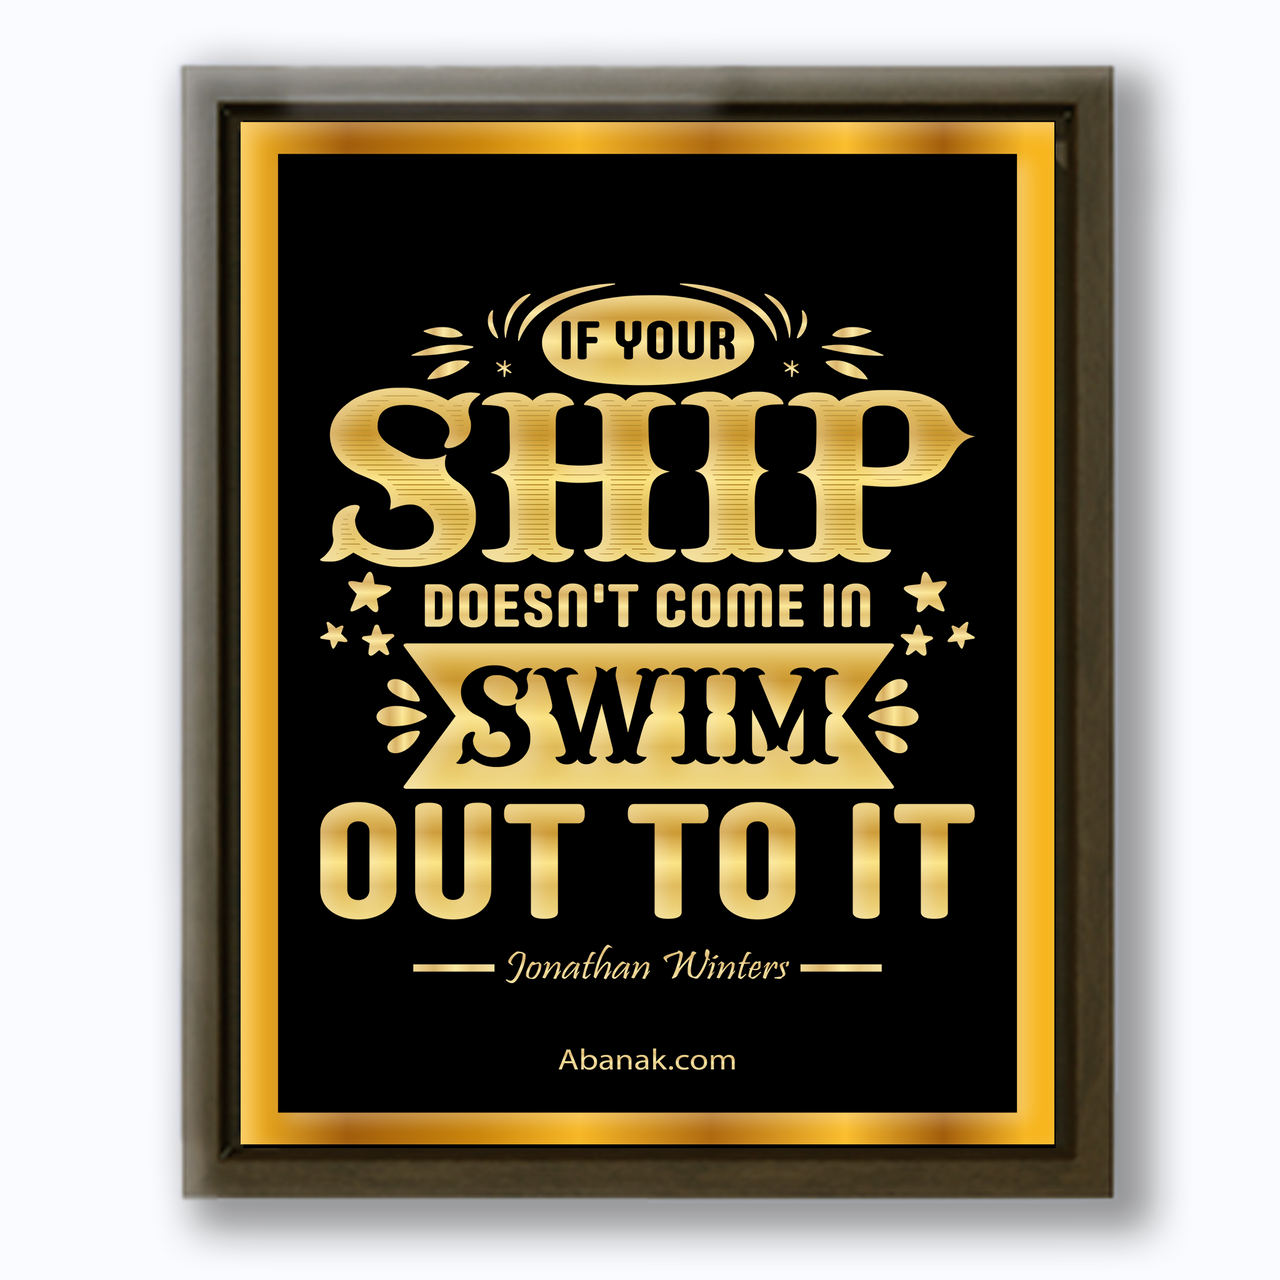 If Your Ship Doesn't Come In - Jonathan Winters Quote - Canvas Print